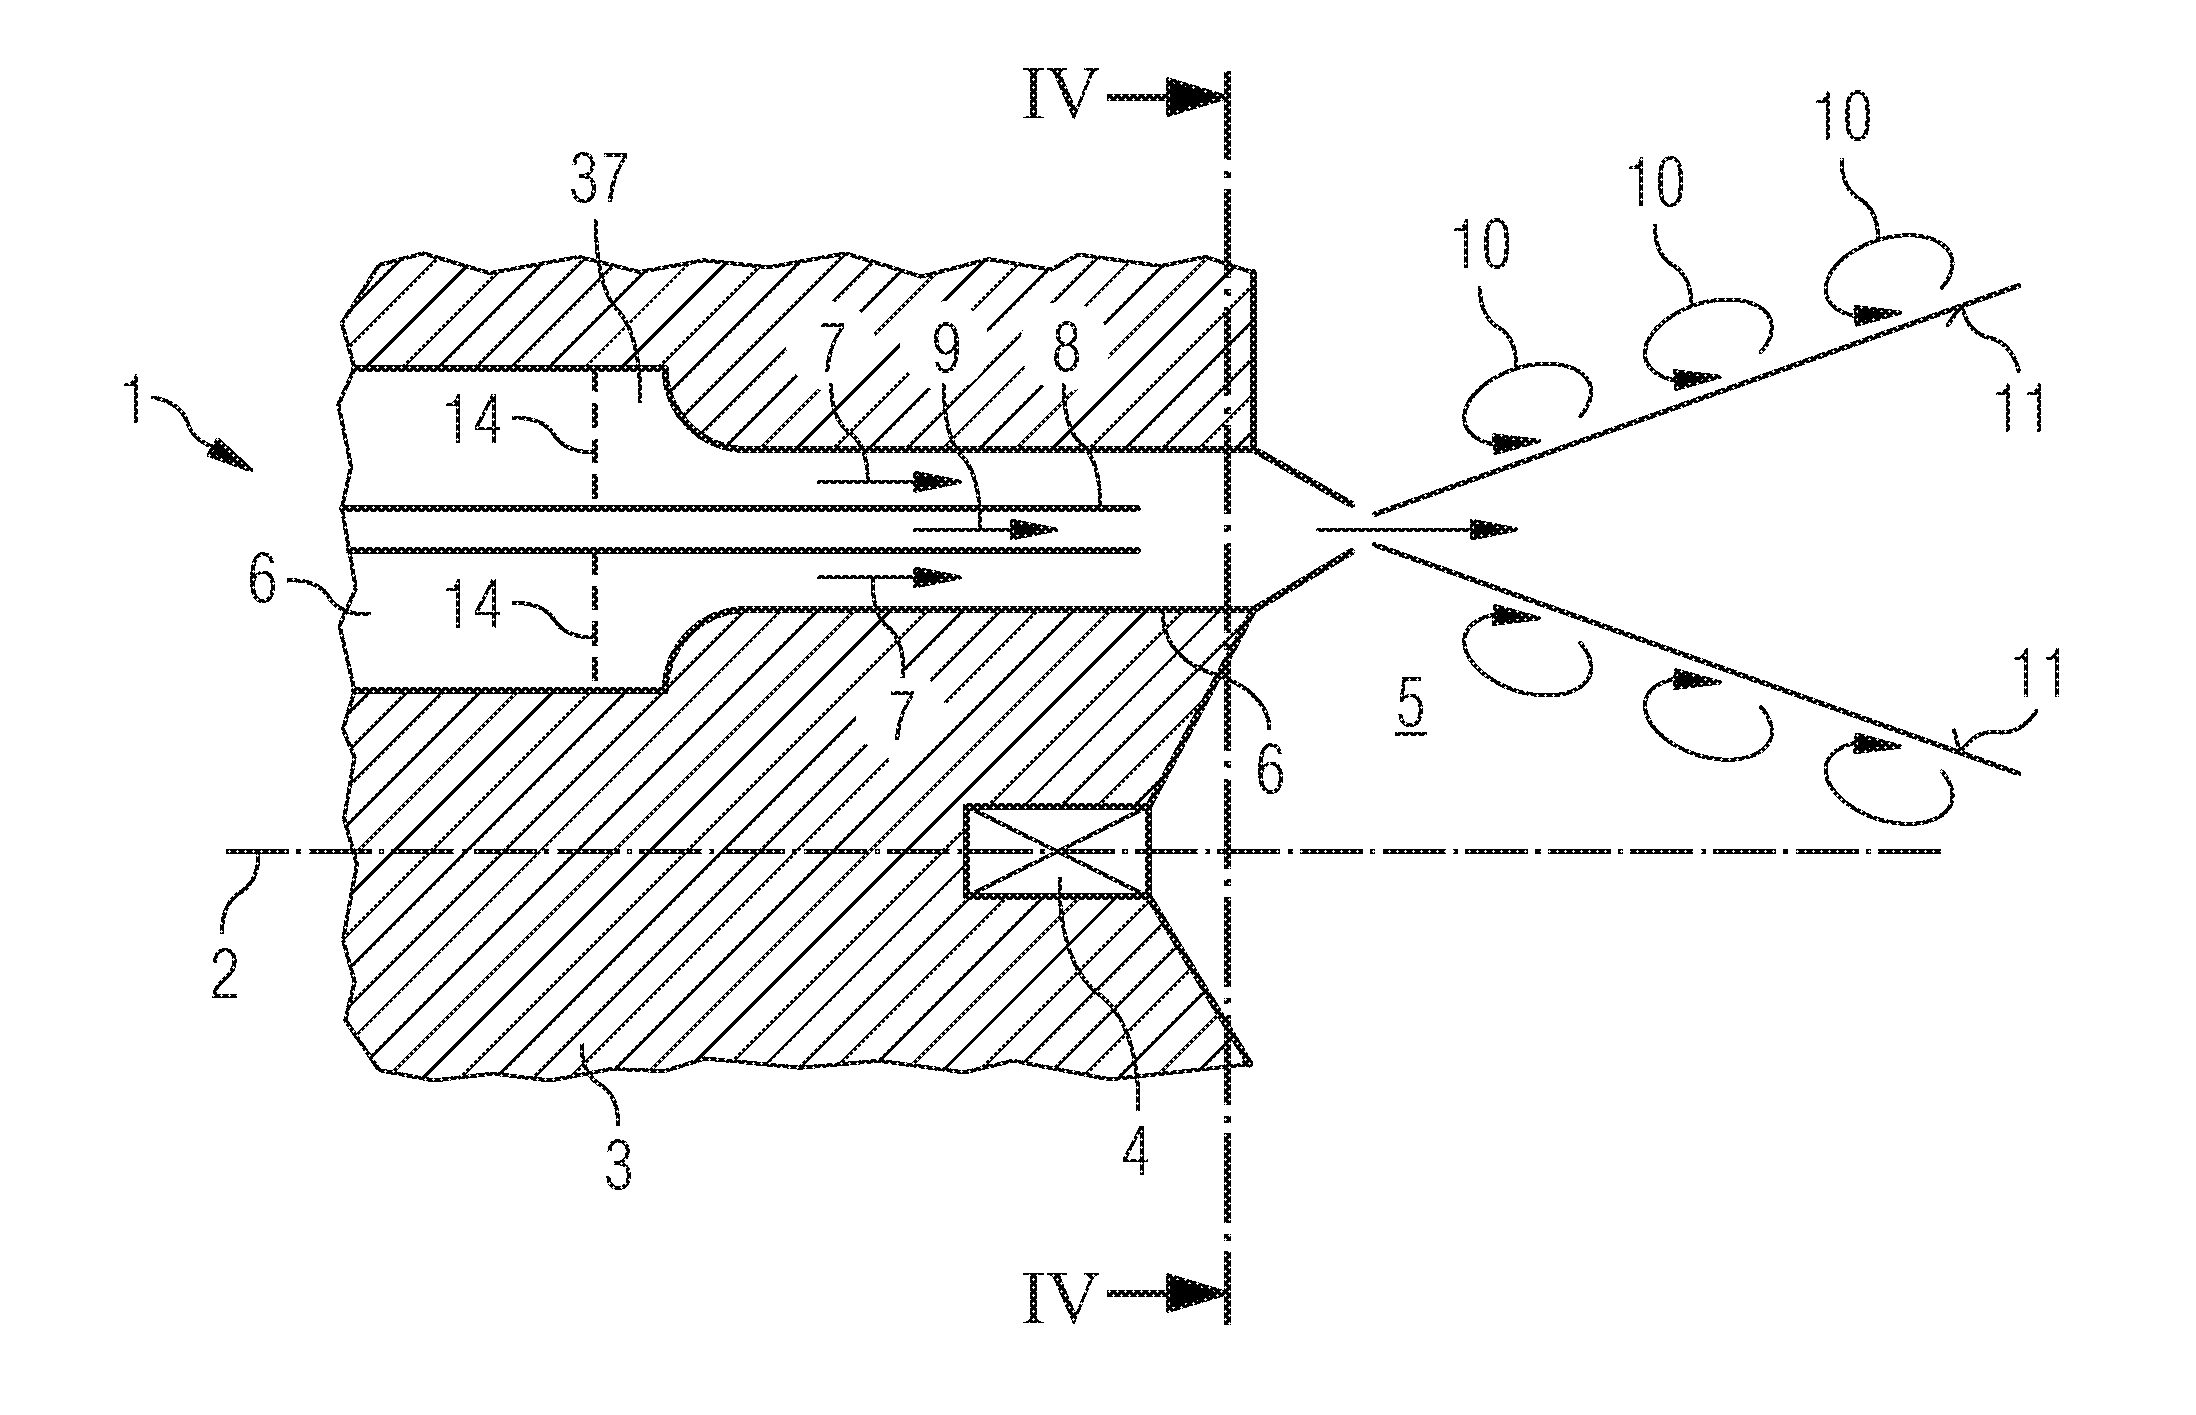 Non-rotational stabilization of the flame of a premixing burner